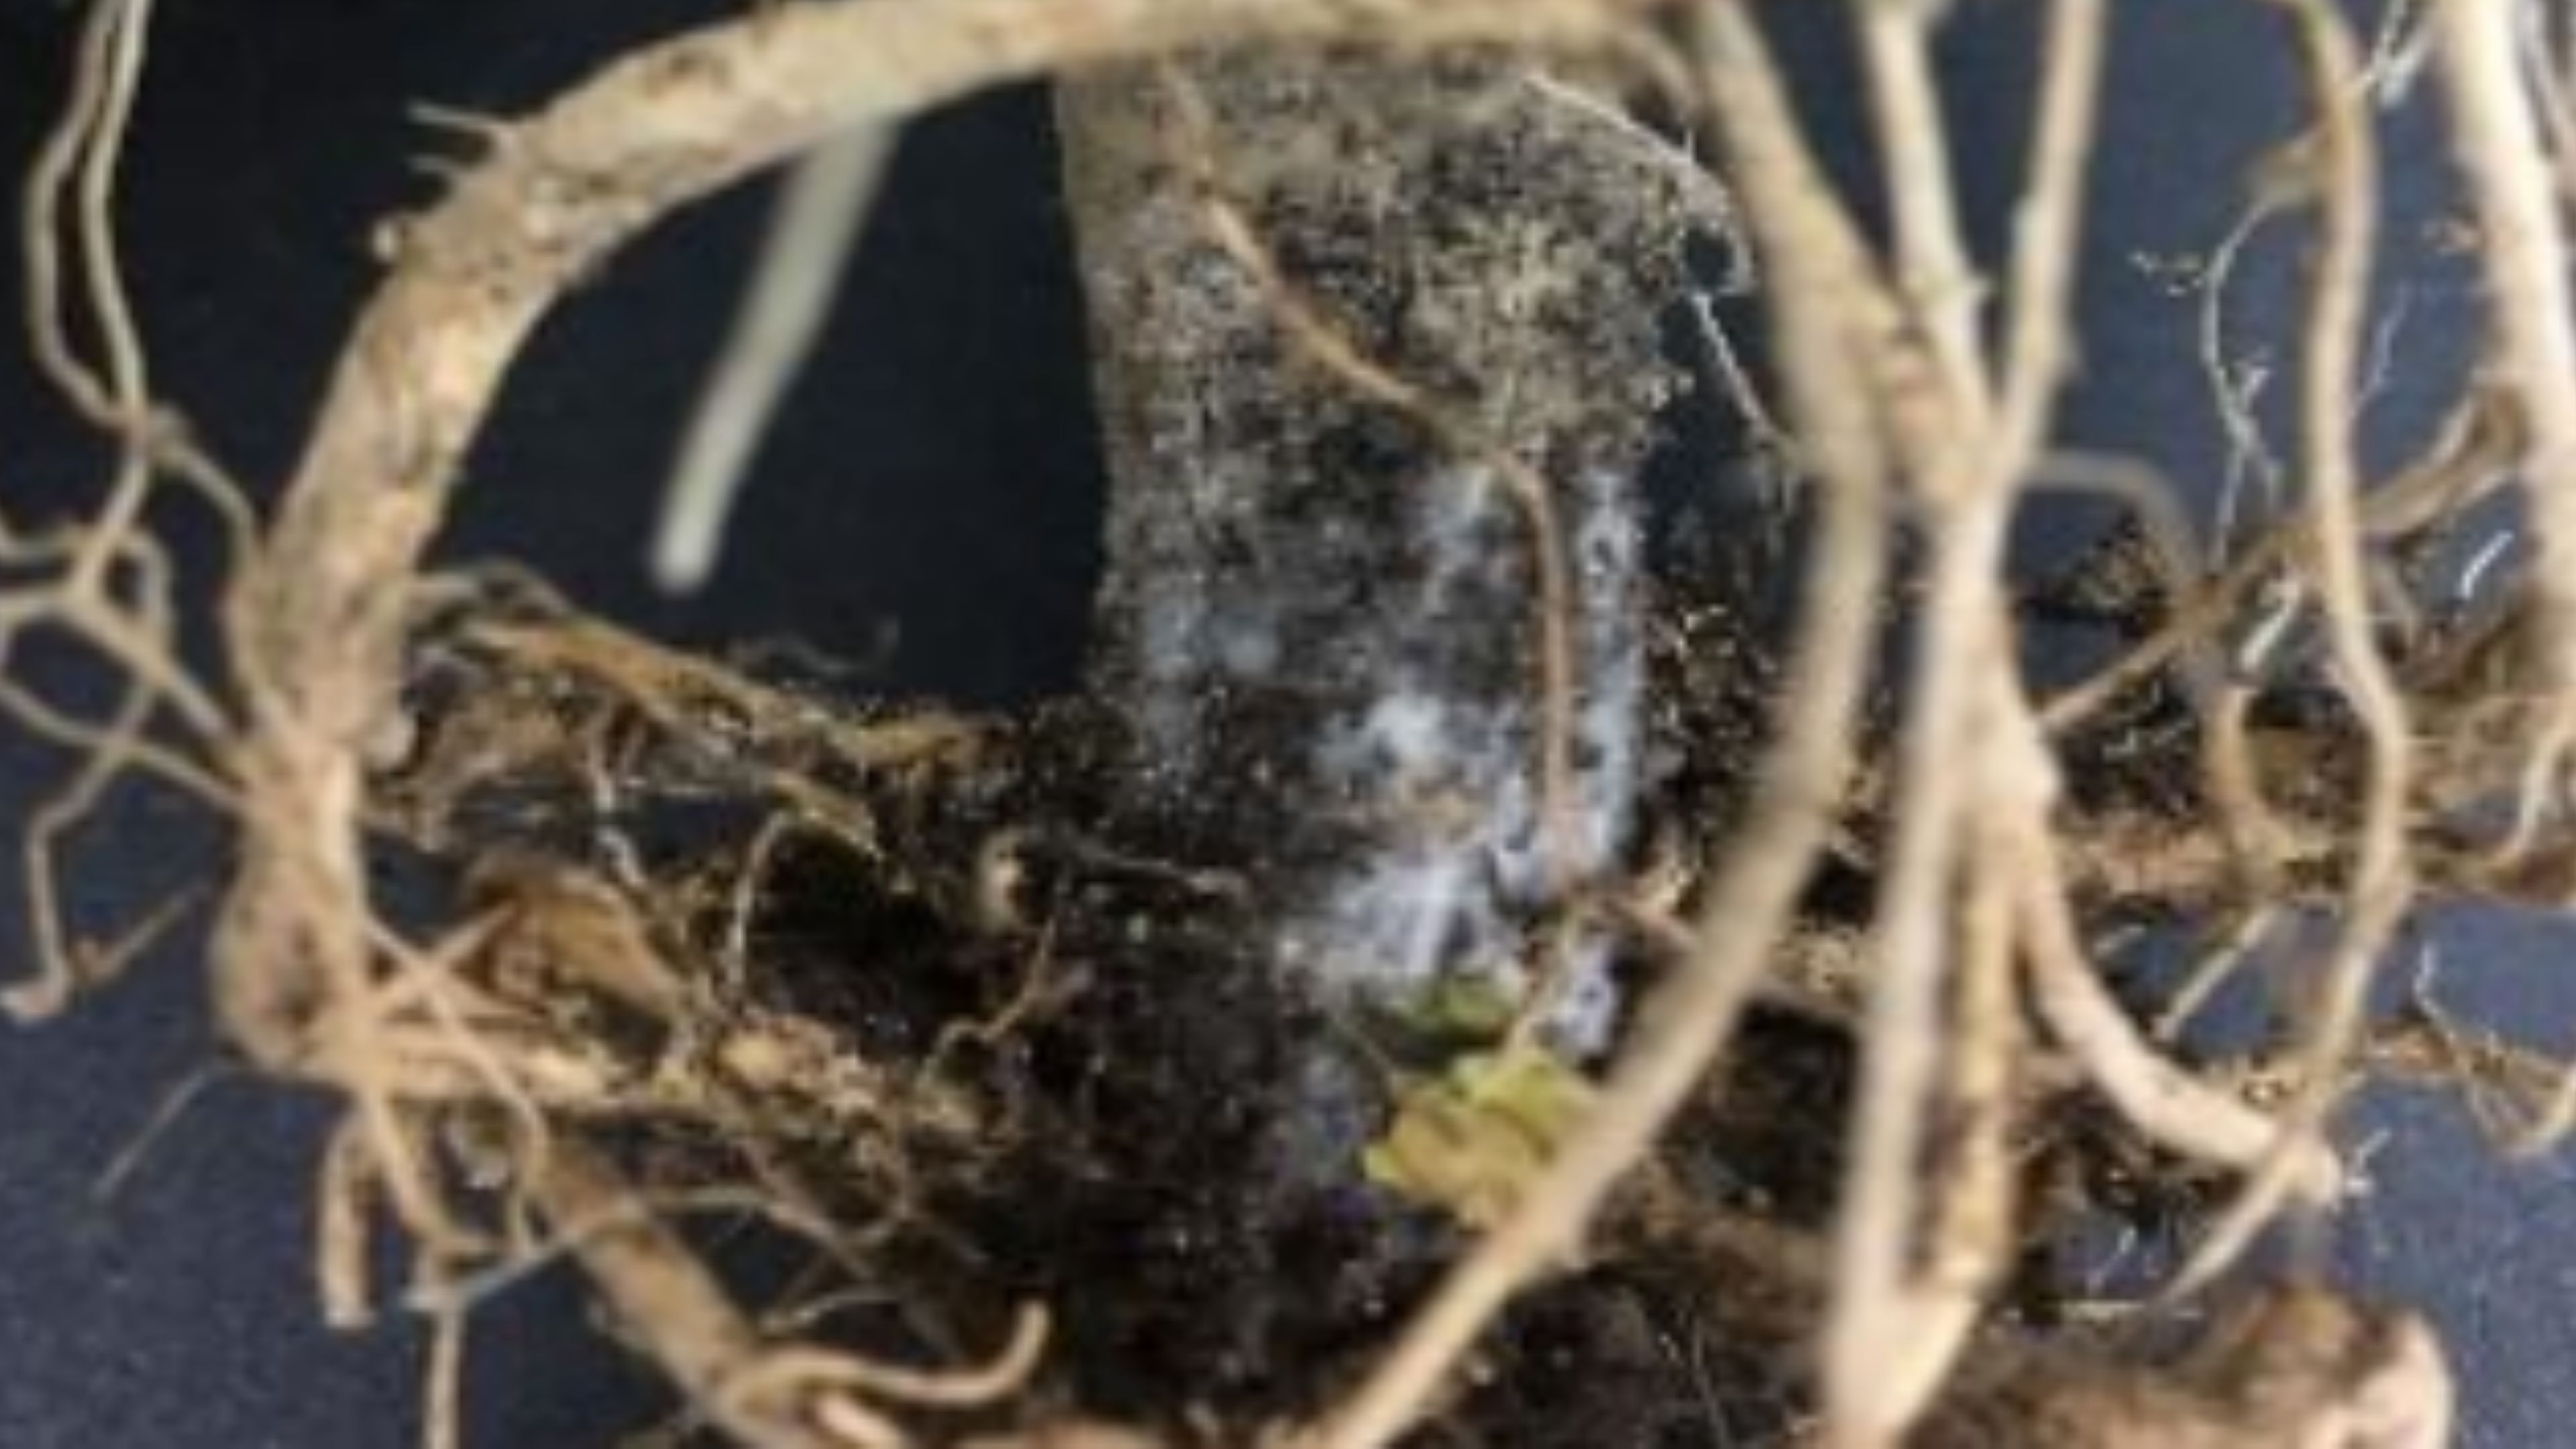 Pythium Root/Crown Rot